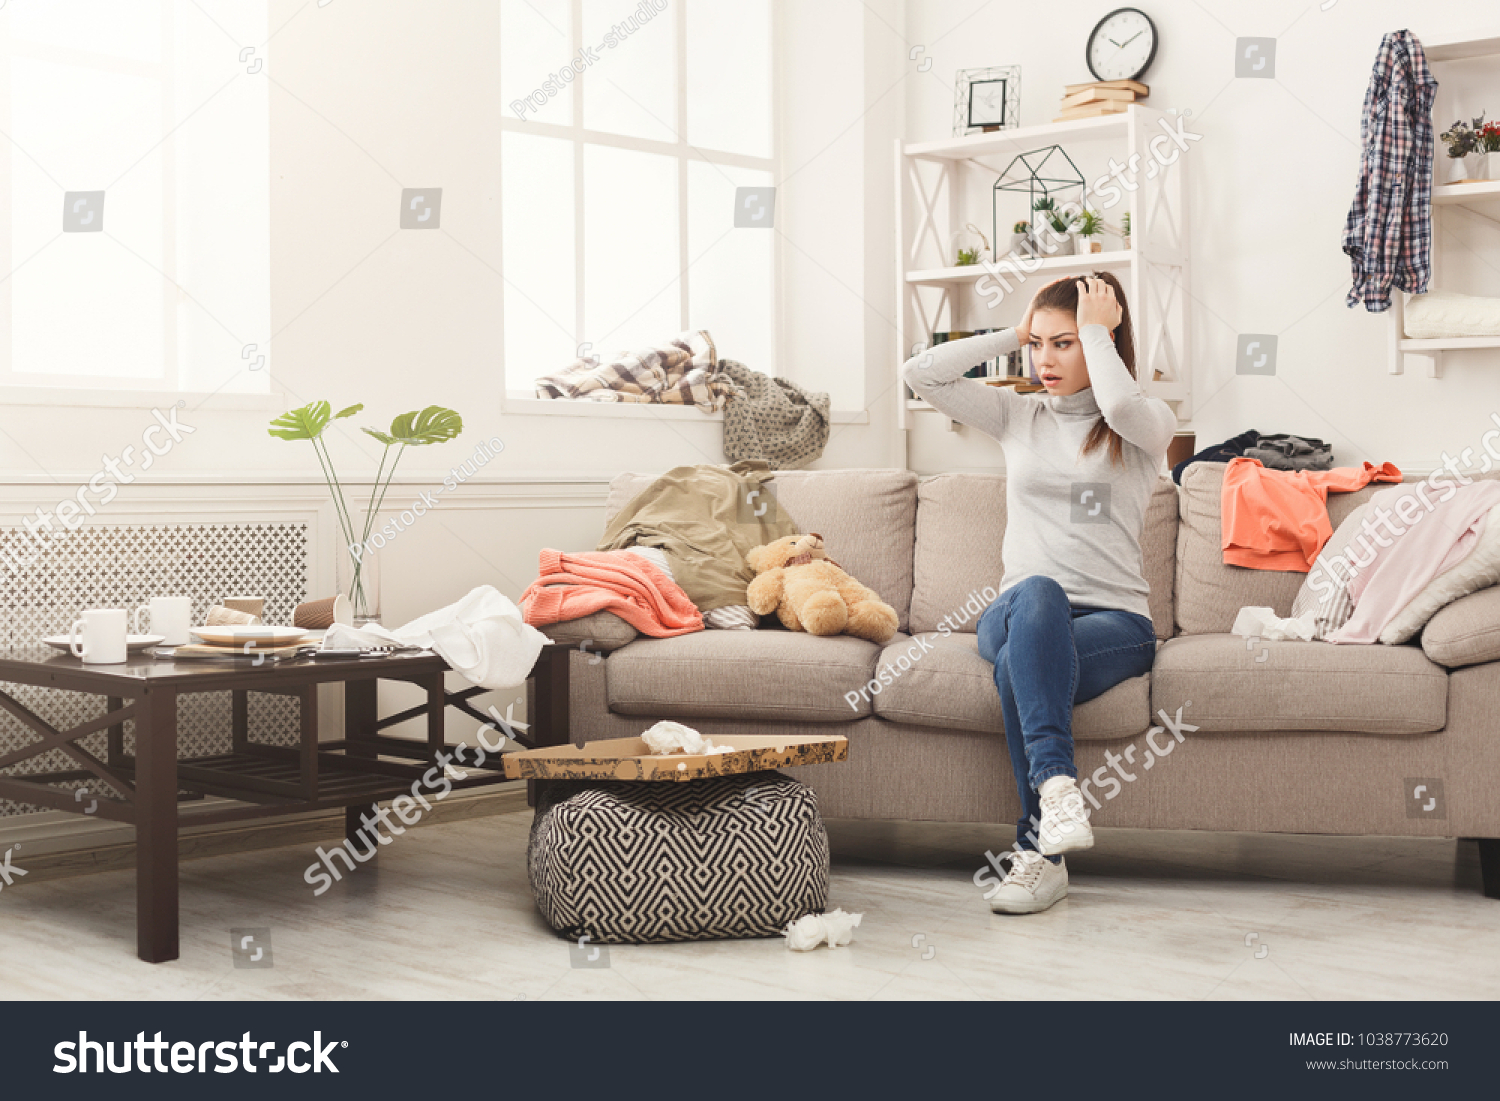 Desperate helpless woman sitting on sofa in messy living room. Young girl surrounded by many stack of clothes. Disorder and mess at home, copy space #1038773620